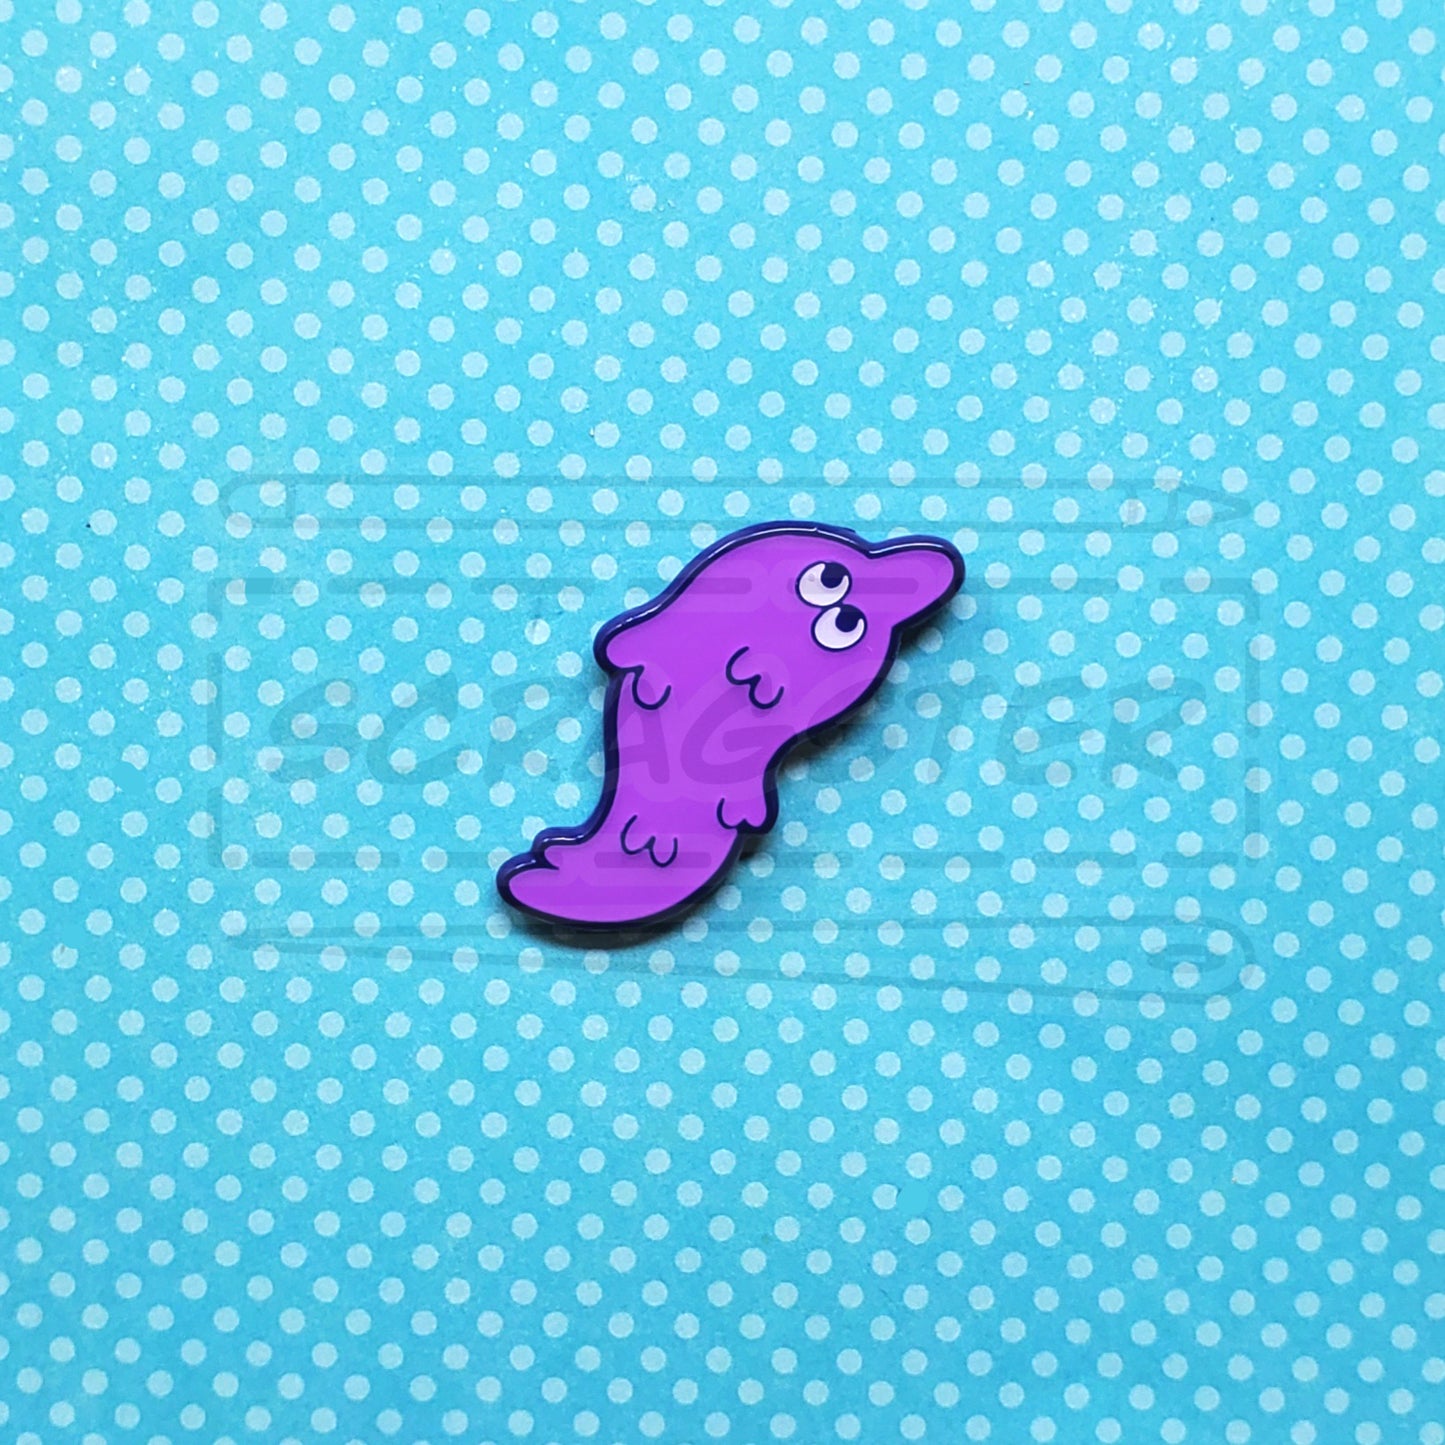 Worm on a String 1.5" Dyed Metal Enamel Pin